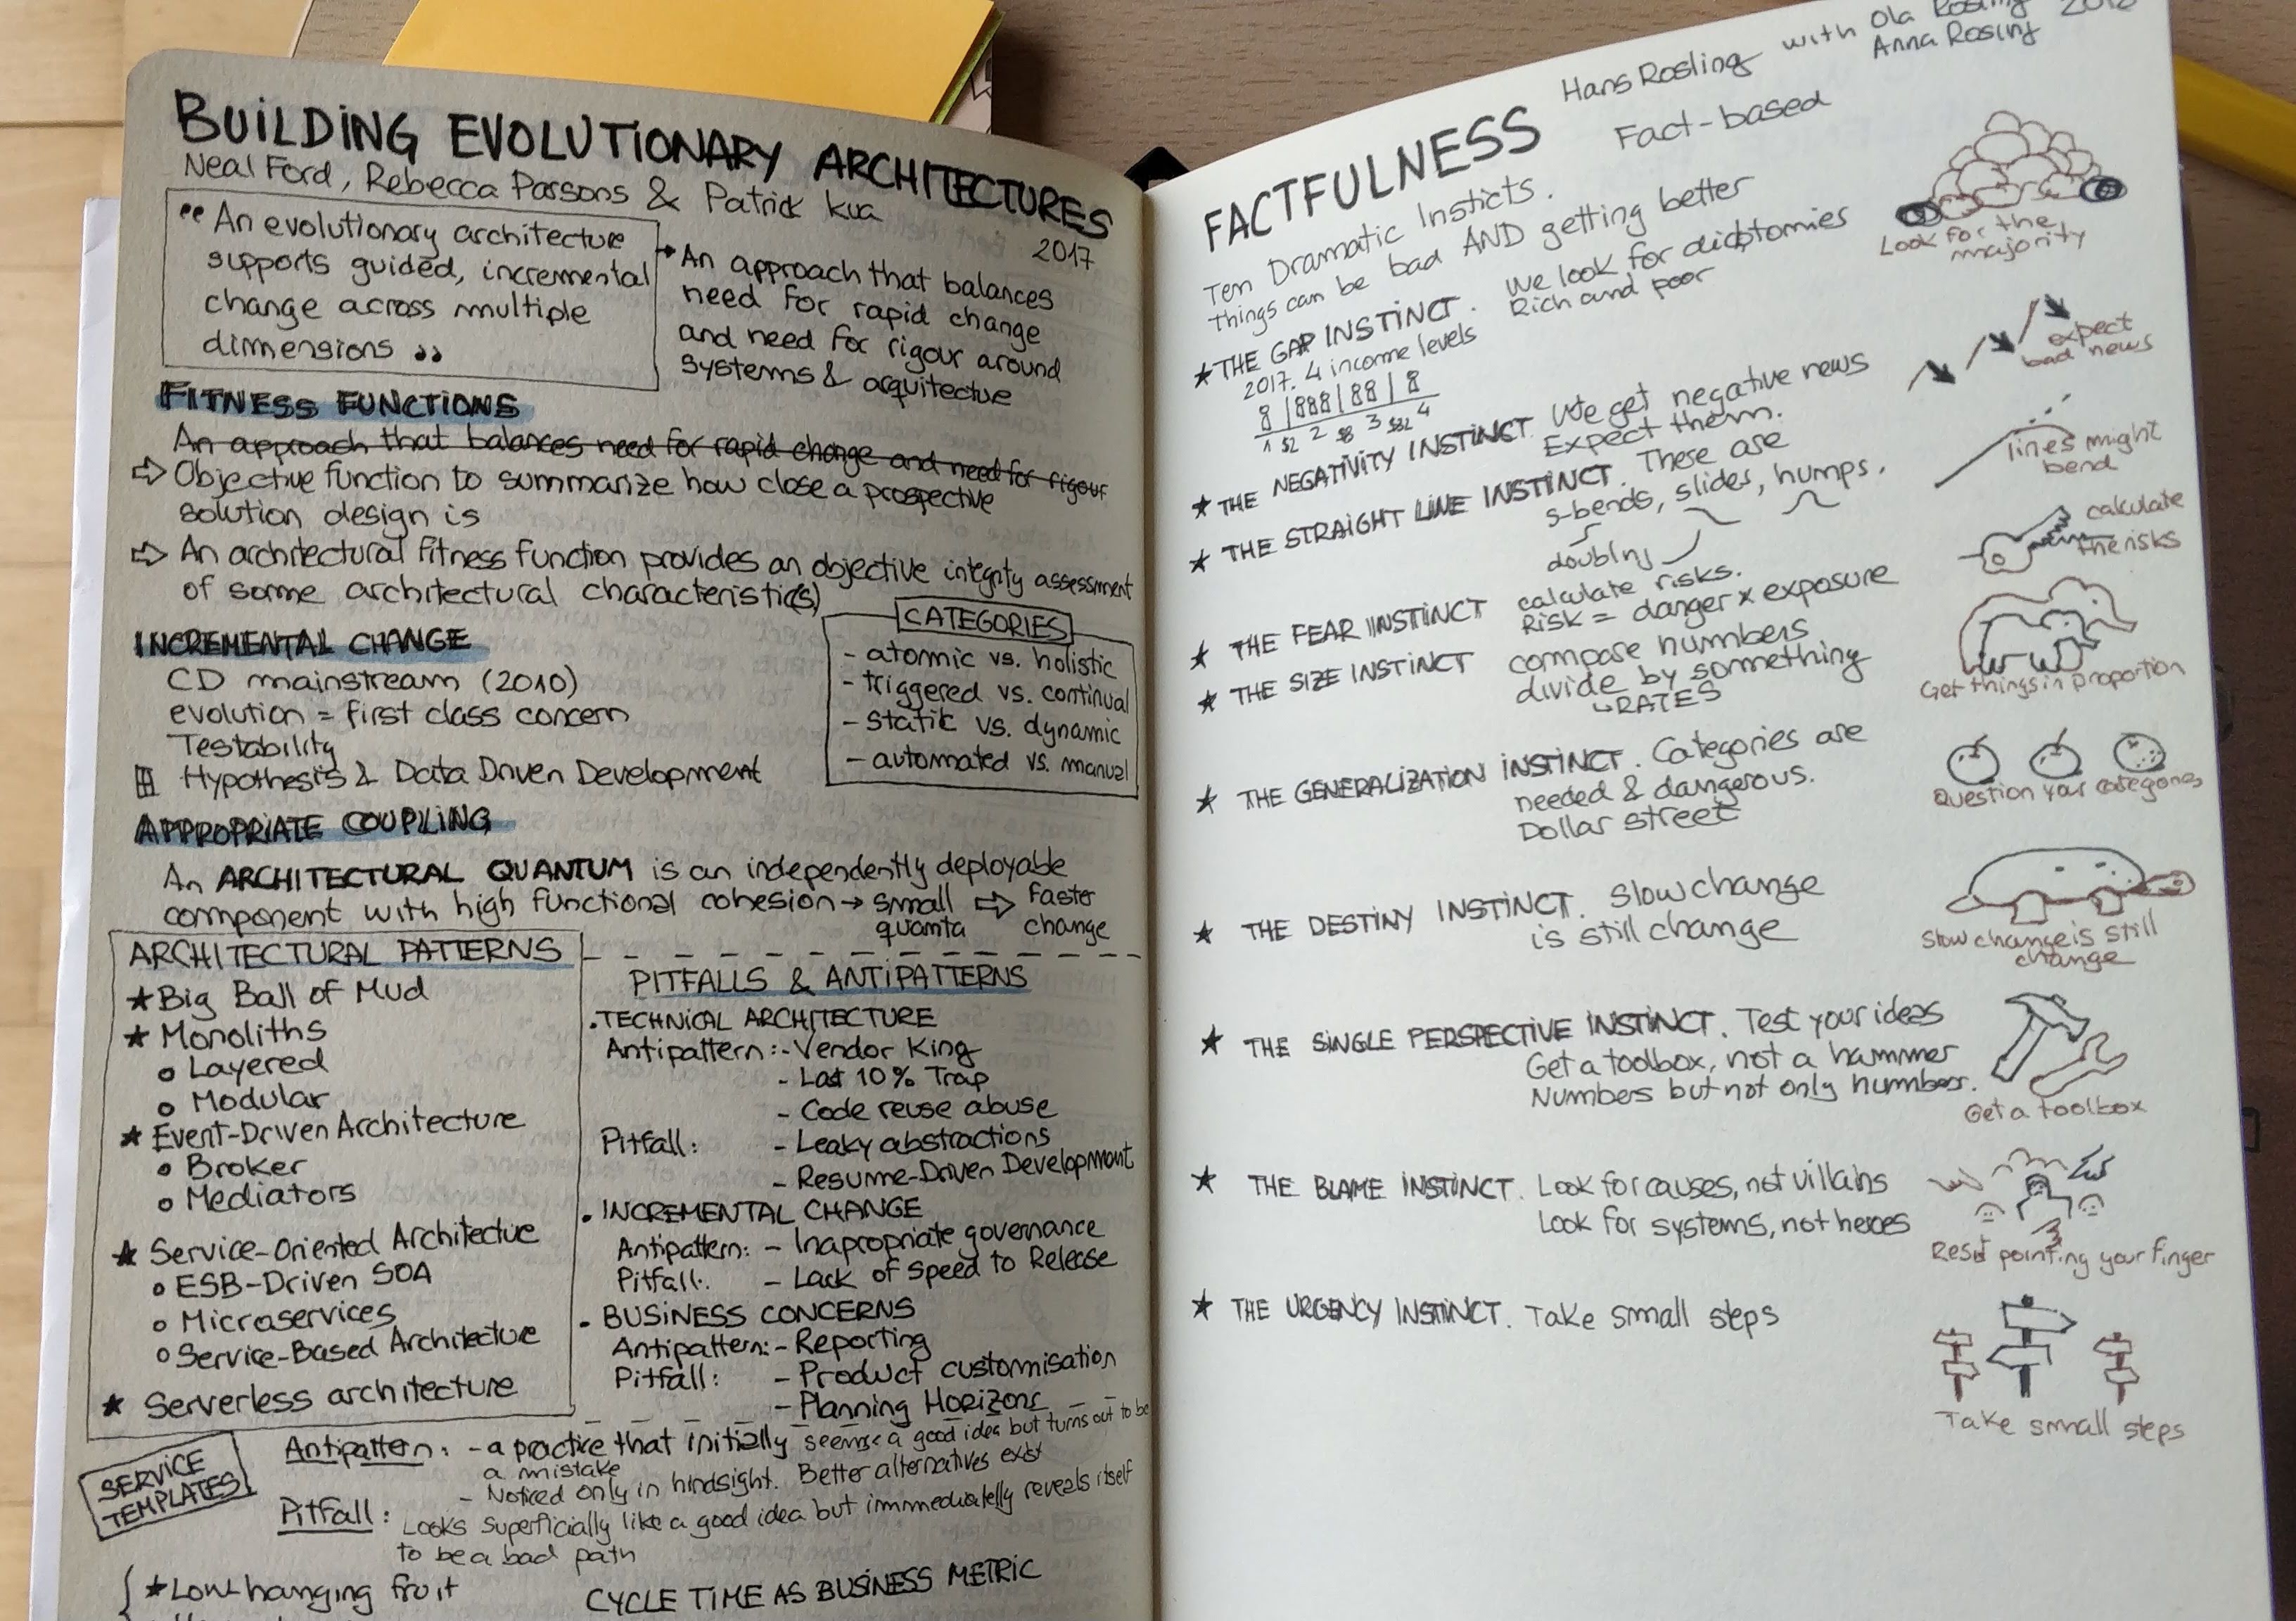 My summaries of Building Evolutionary Architectures and Factfulness, 2019